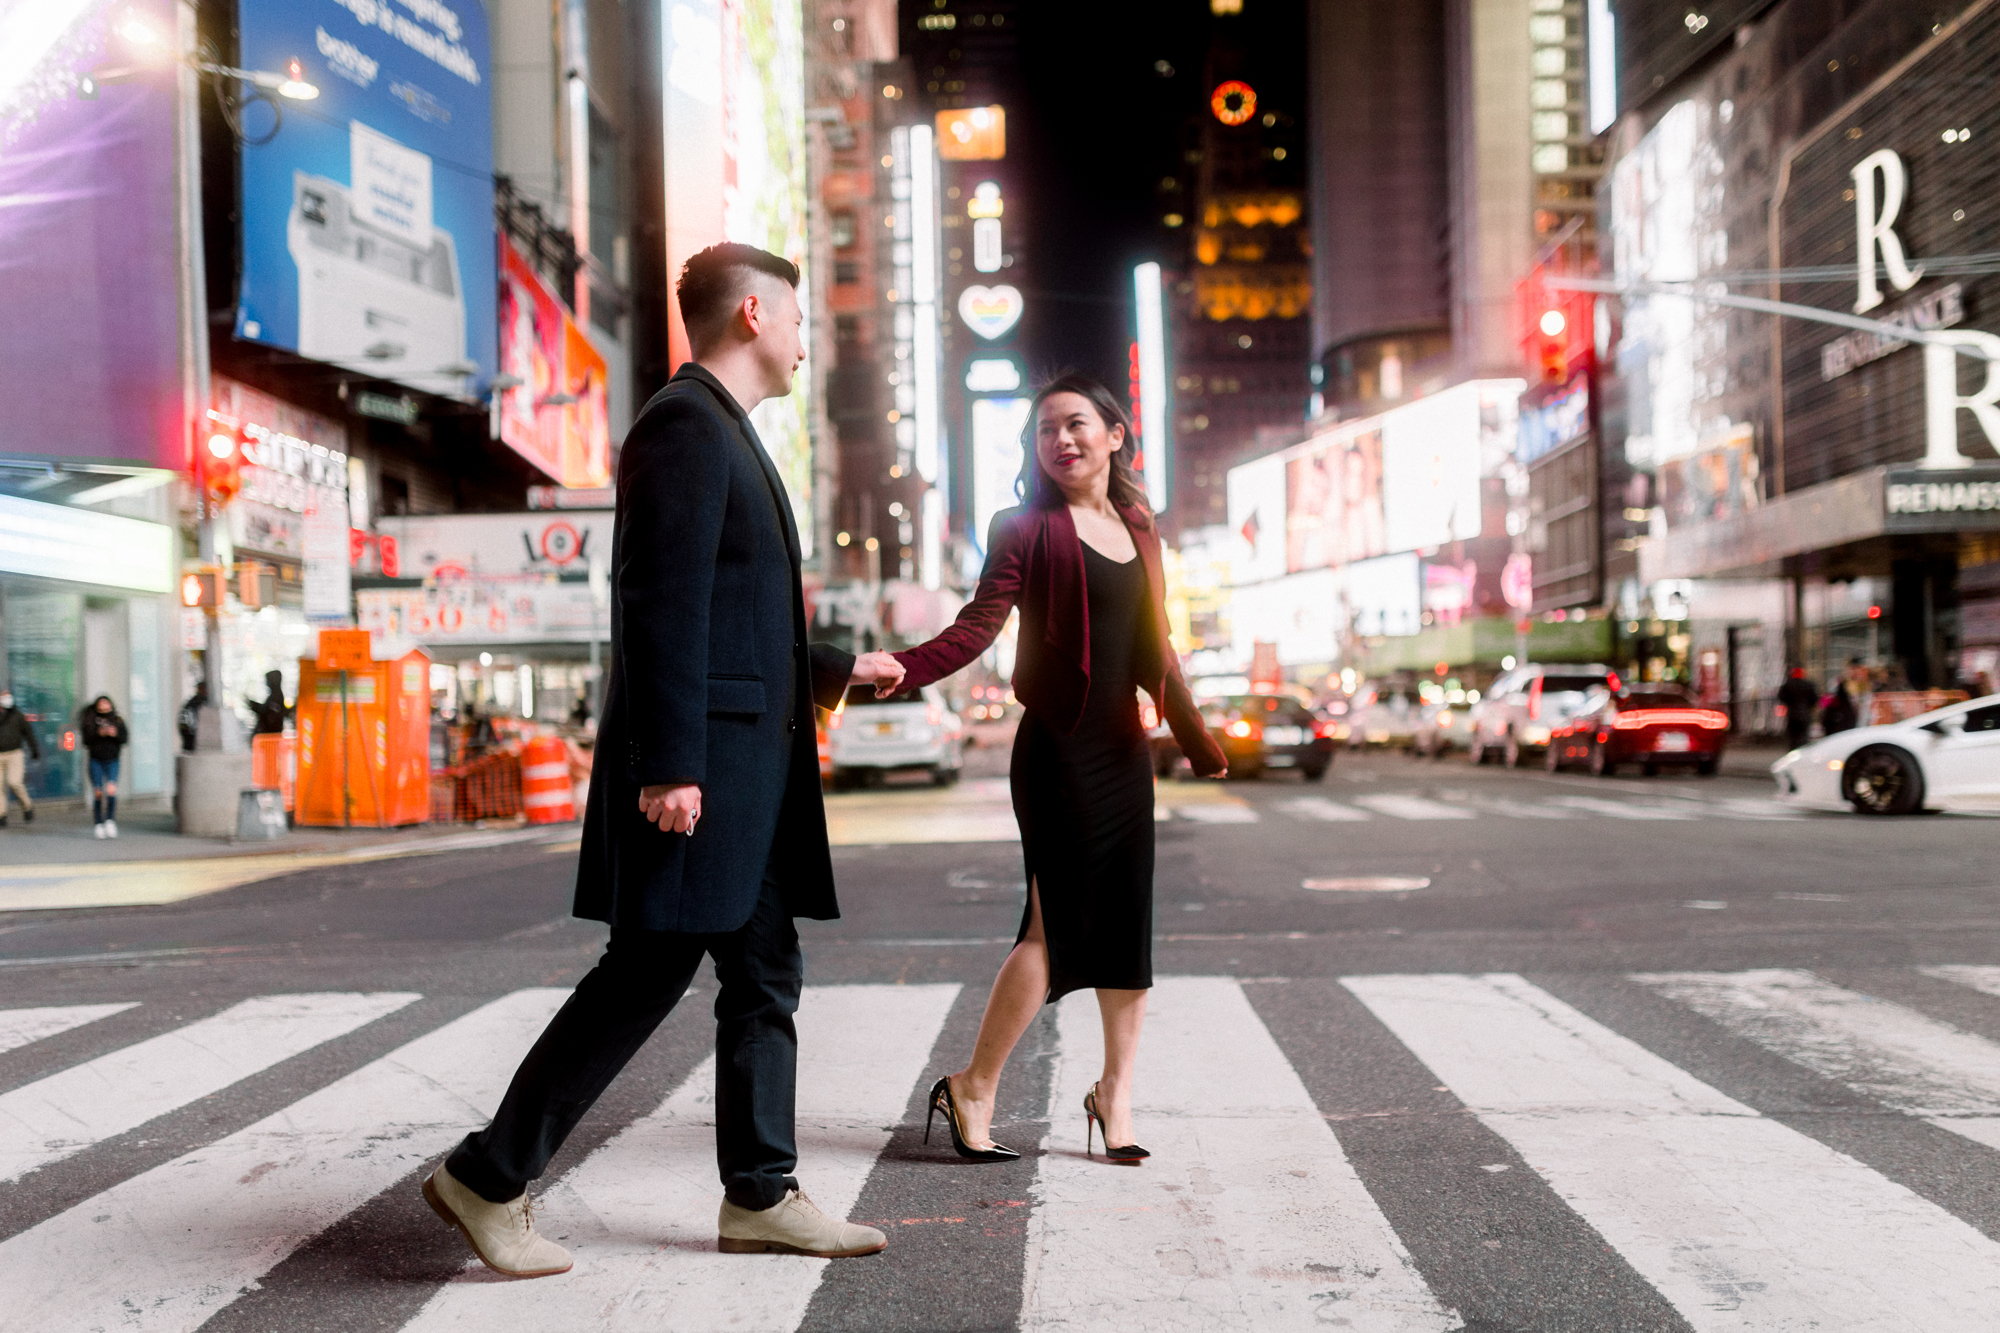 Joyful Nighttime Winter Engagement Photos in New York's Iconic Times Square